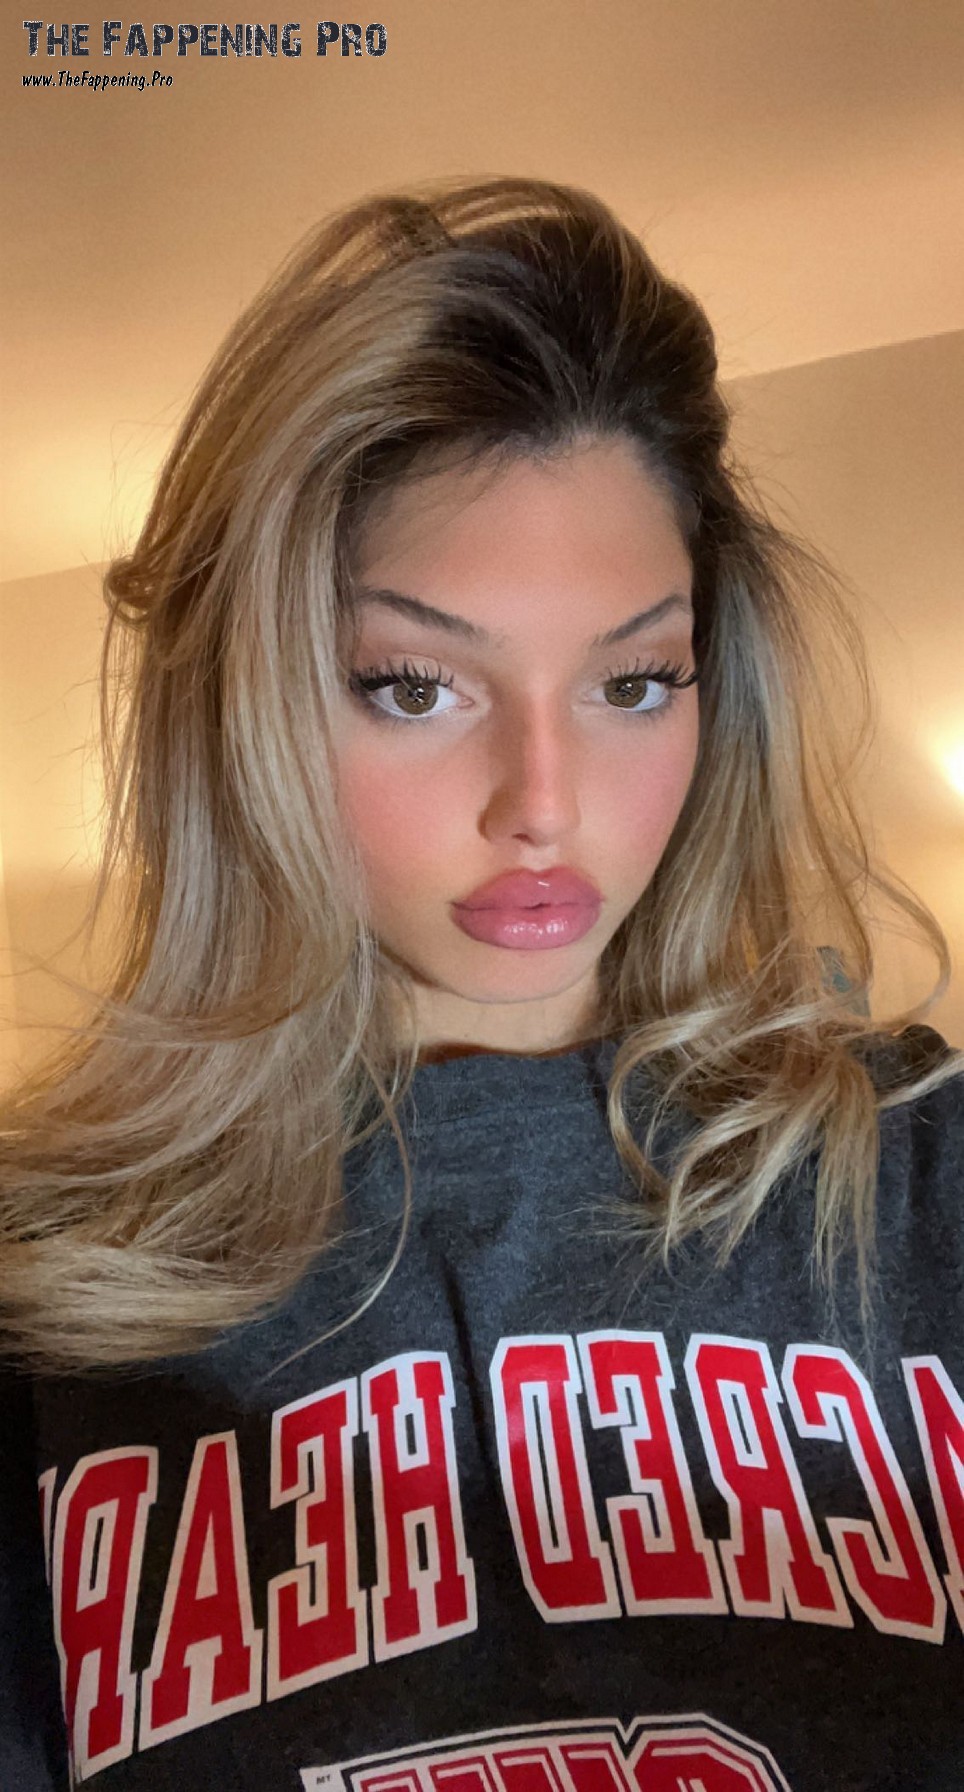 Overtime Megan Nude Leaked TheFappening.Pro 10 - Megan Eugenio aka Overtime Megan Nude TikTok Star From Massachusetts (Over 100 Leaked Photos)